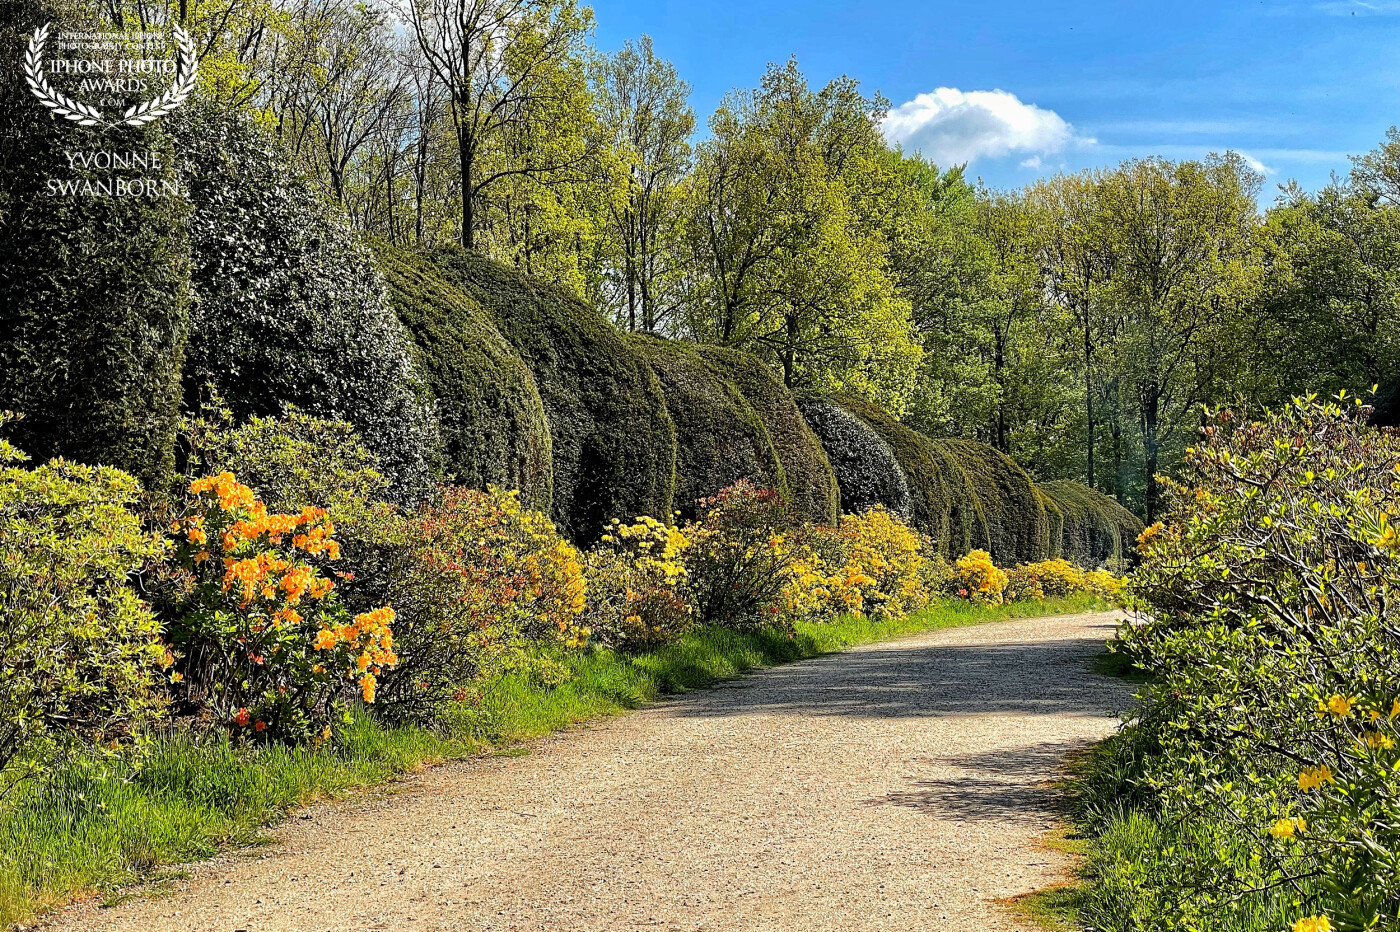 A part of the ‘Azalea’ lane at the Duno Estate in Doorwerth.